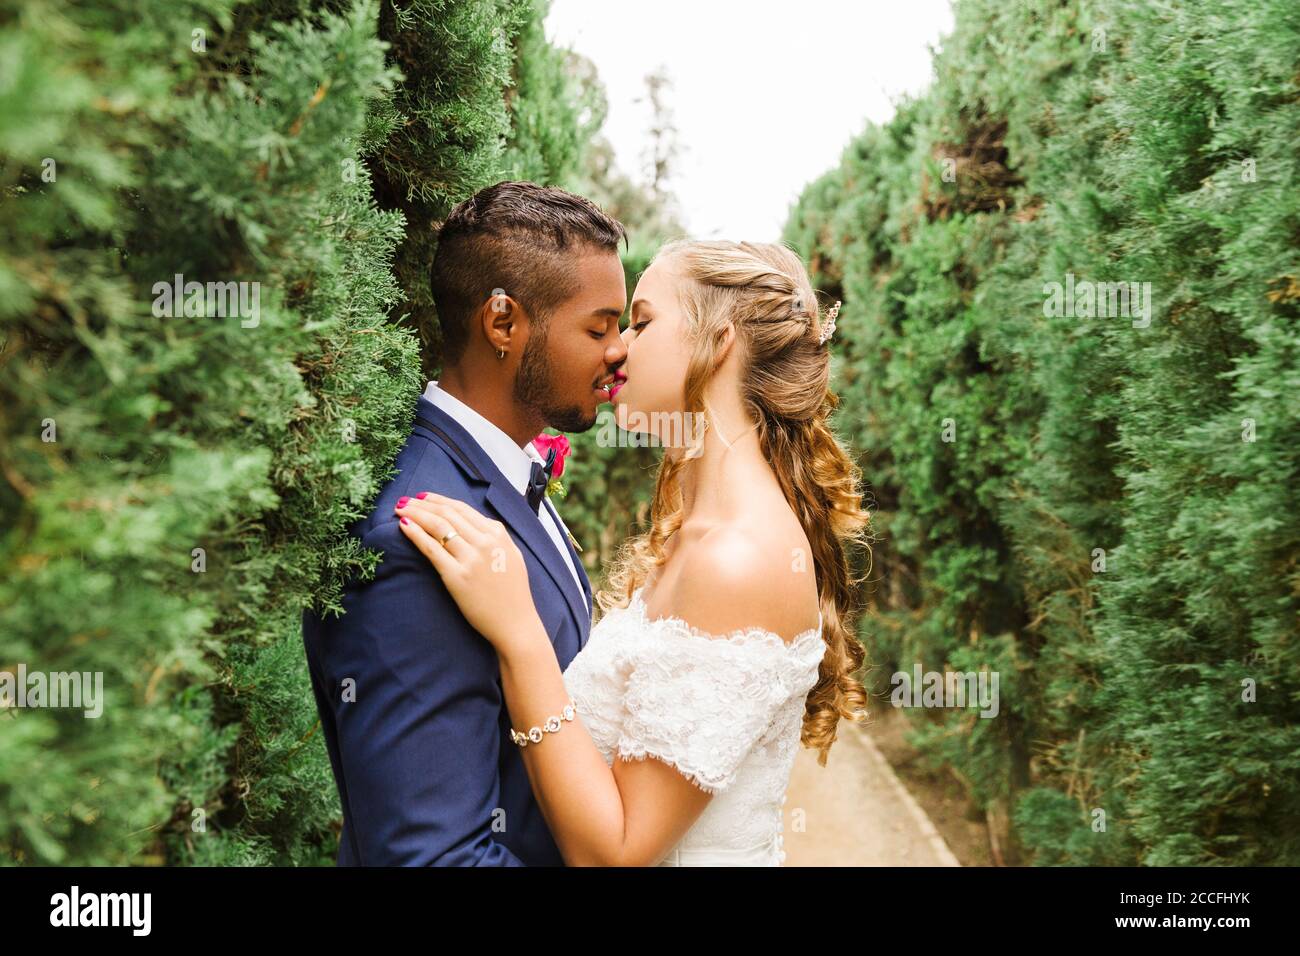 Wedding, newlyweds, young adults, diversity, love, garden, hedge, kissing Stock Photo